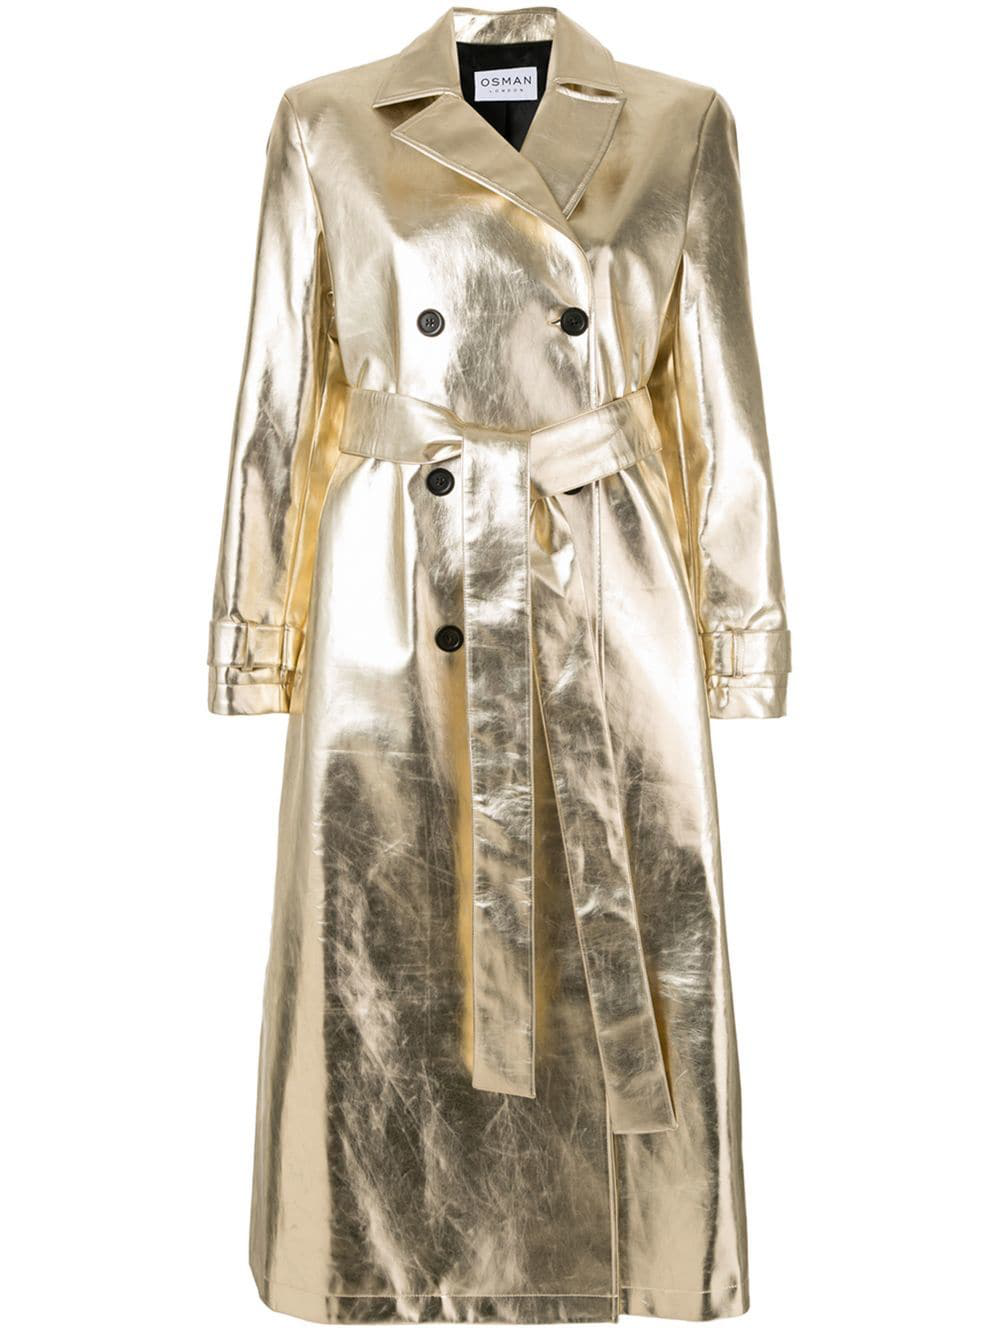 Osman Double-Breasted Metallic Trench Coat - Gold | ModeSens